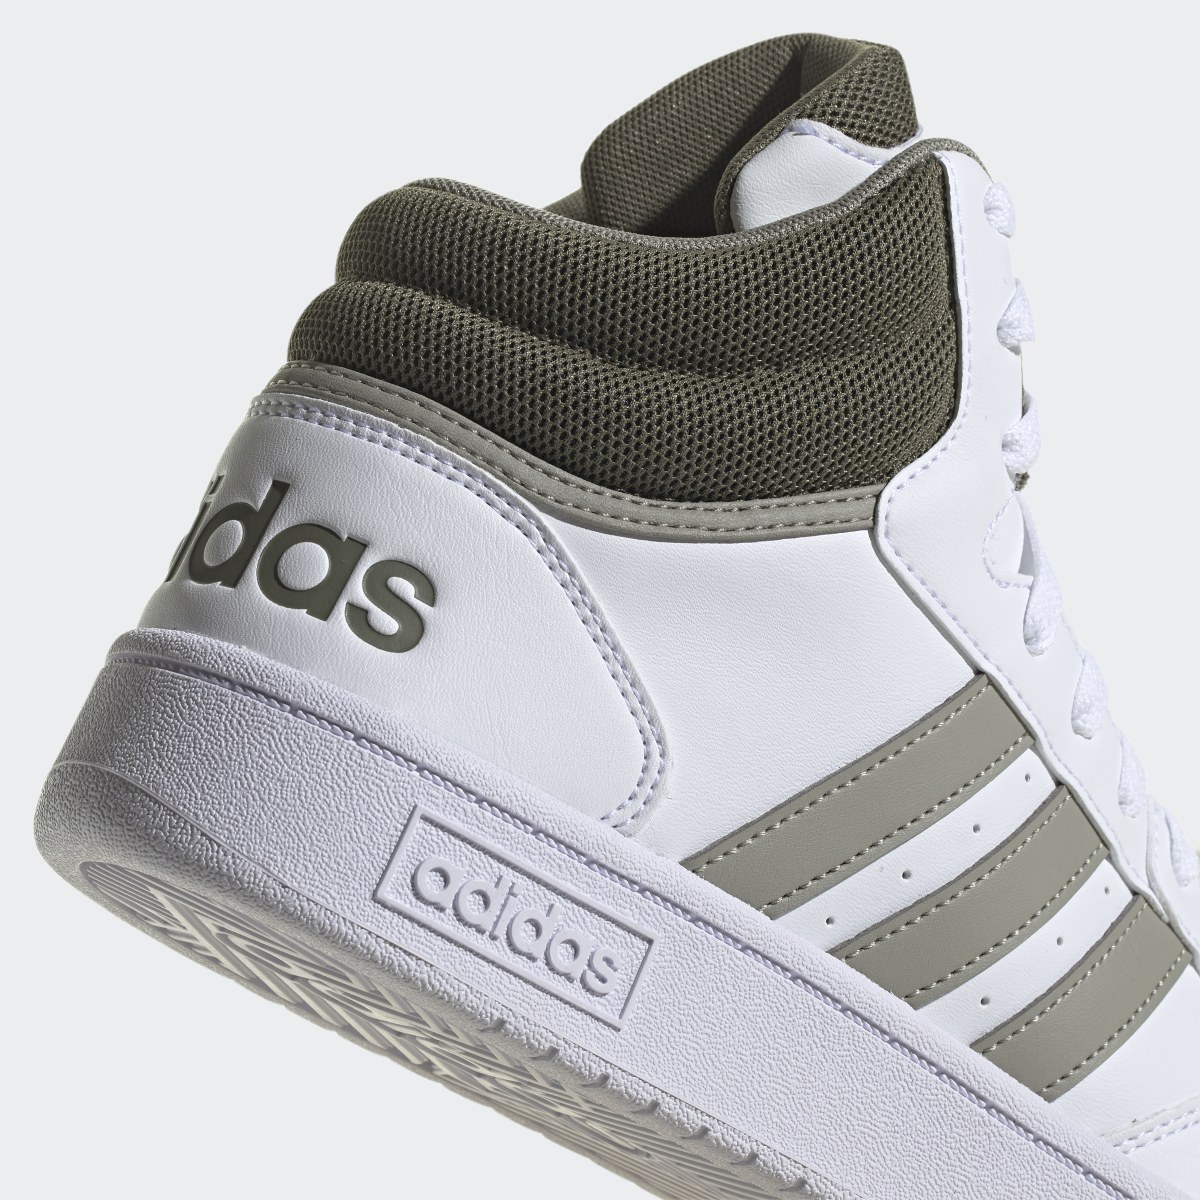 Adidas Hoops 3.0 Mid Classic Vintage Shoes. 9